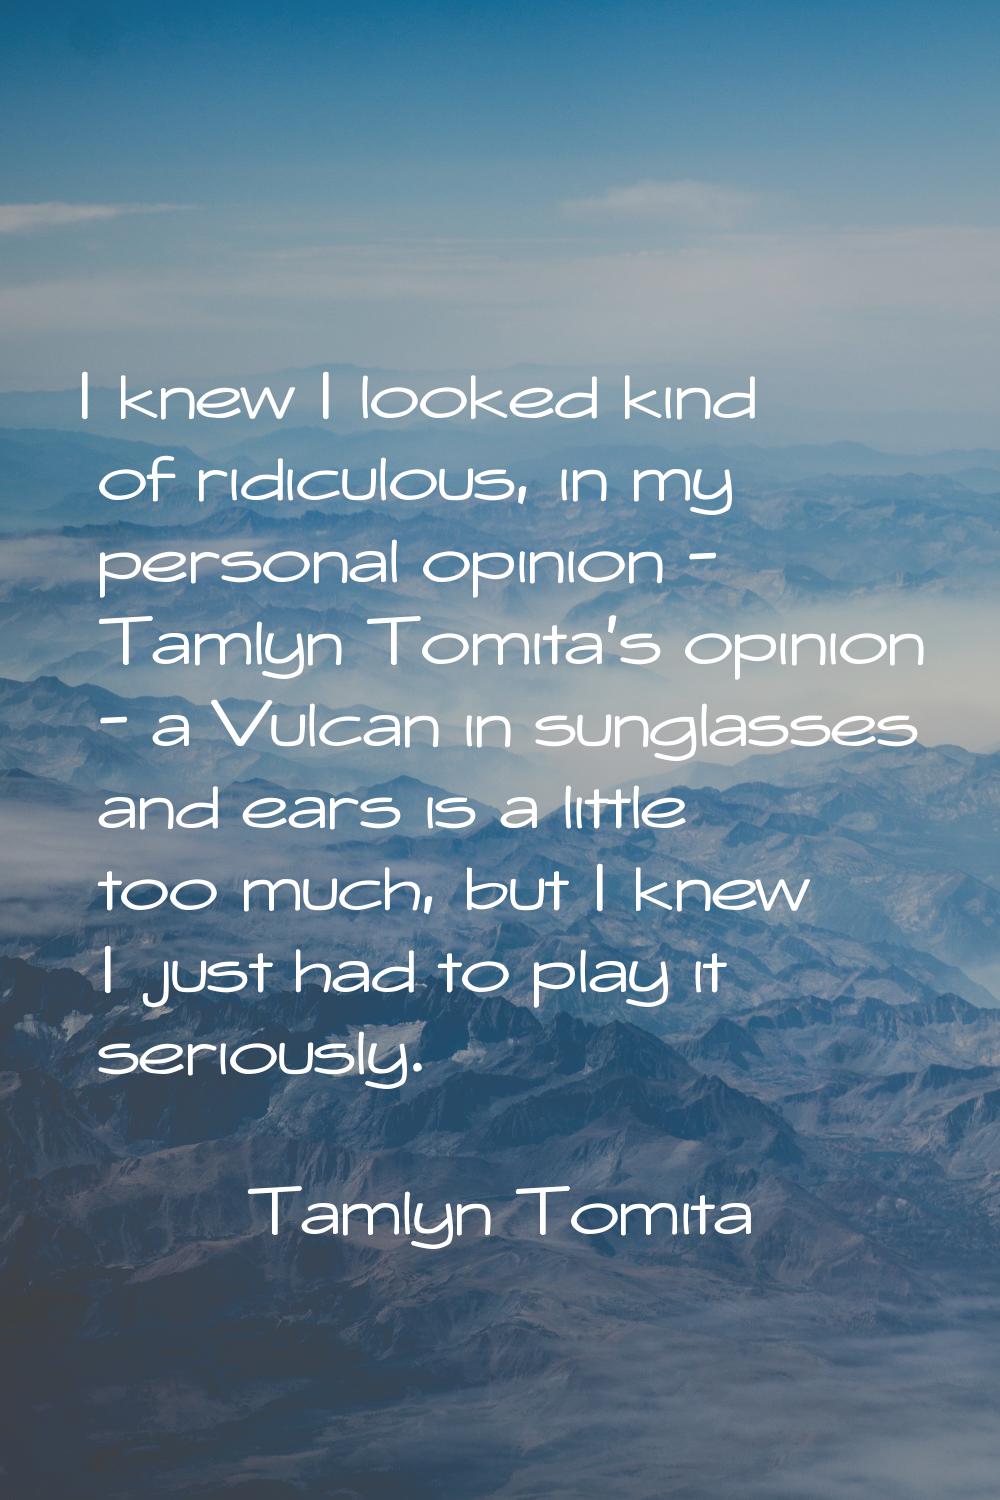 I knew I looked kind of ridiculous, in my personal opinion - Tamlyn Tomita's opinion - a Vulcan in 